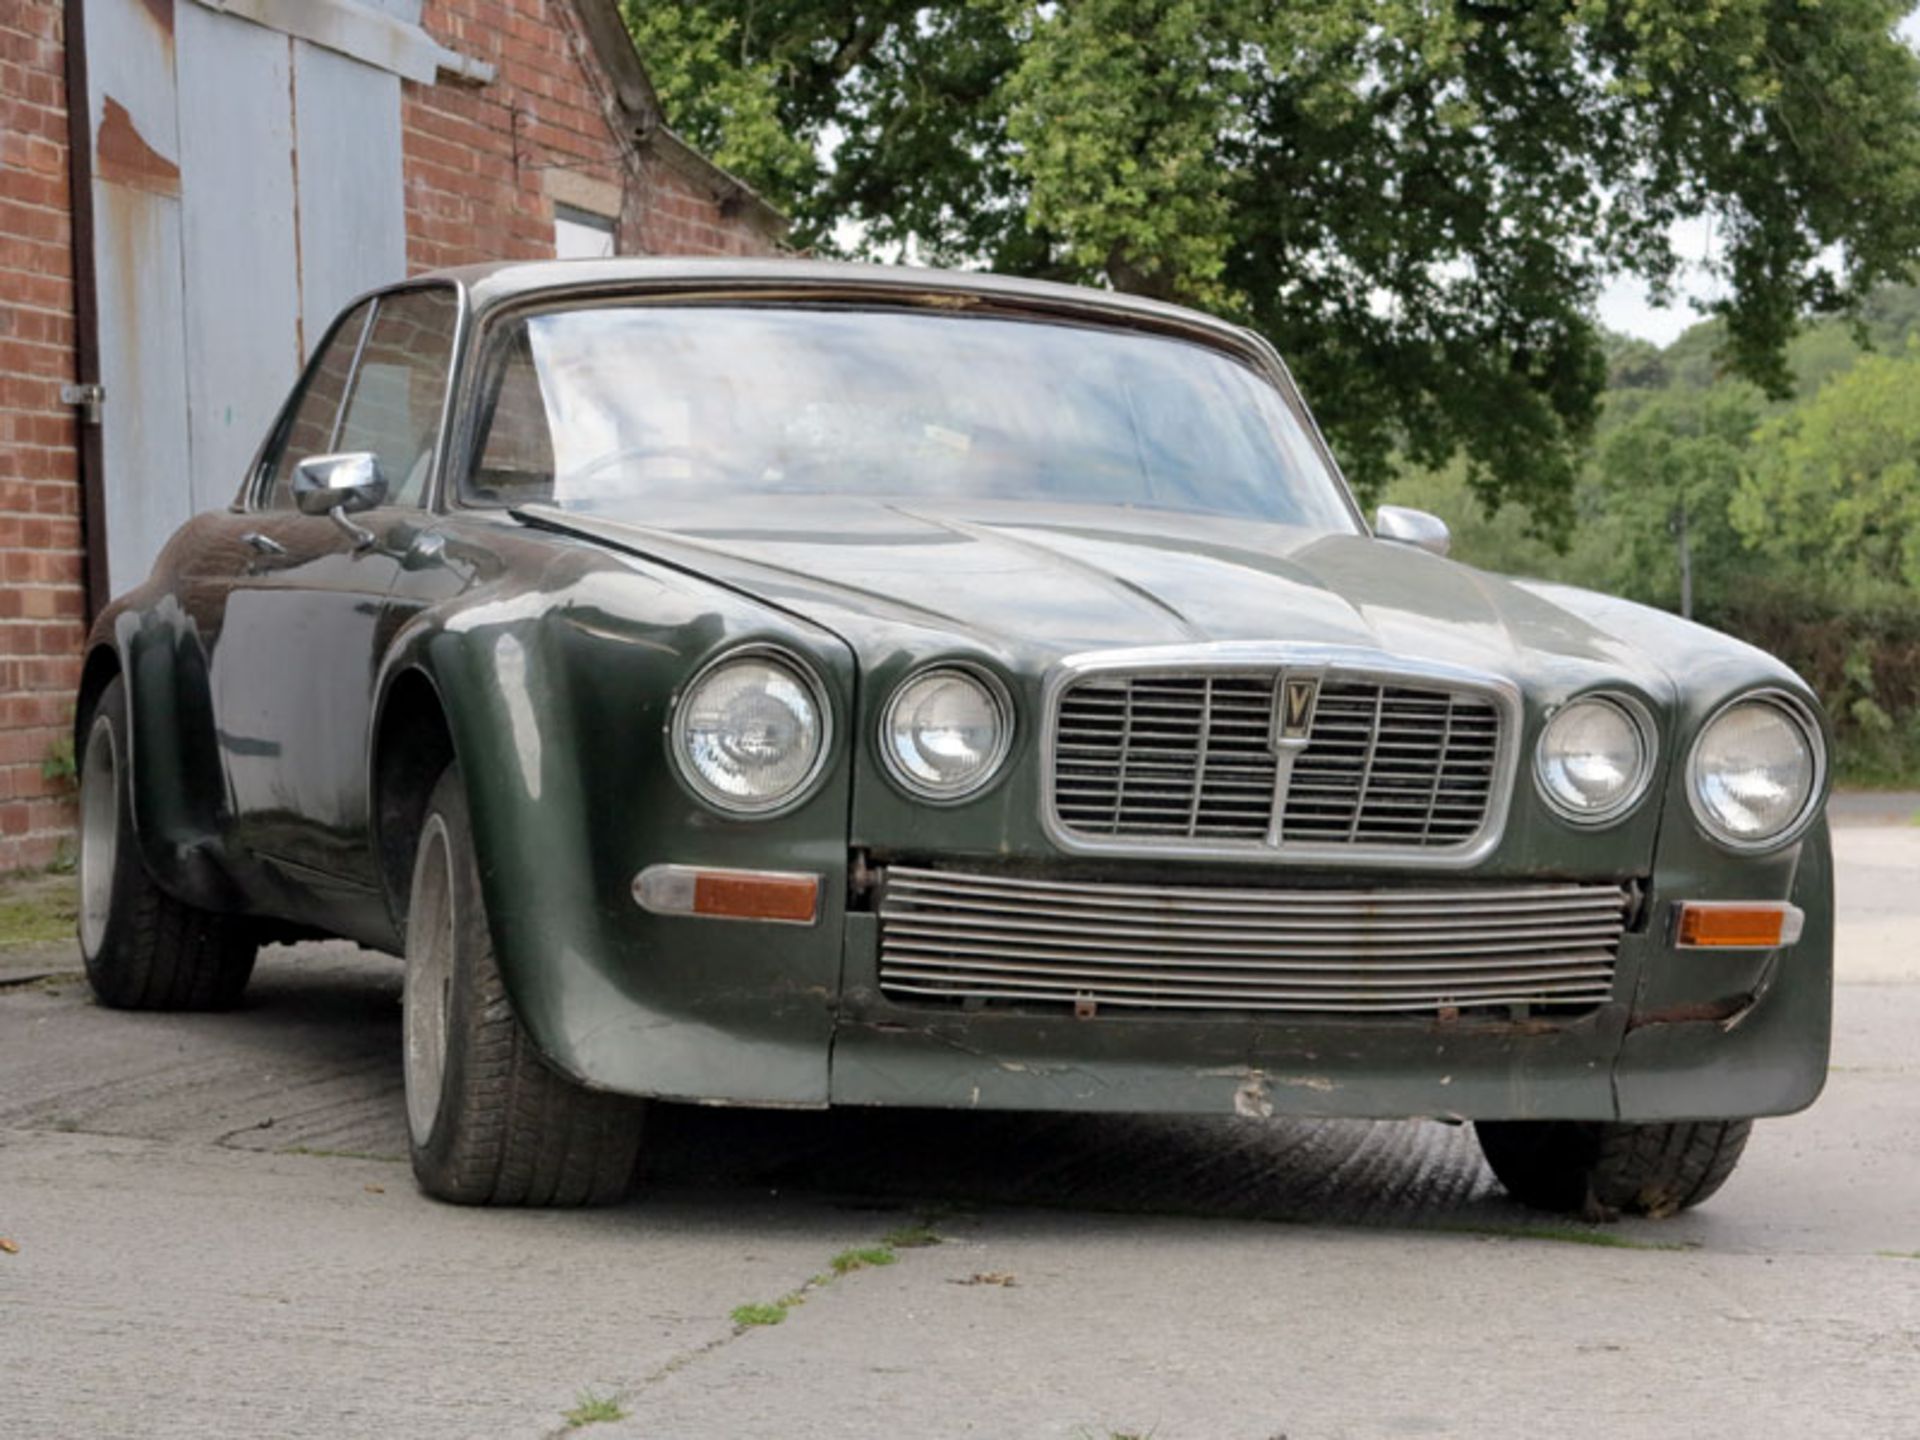 - John Steed's famous mount in 'The New Avengers' TV series

- The eighth XJ-C 12 made and - Image 4 of 12